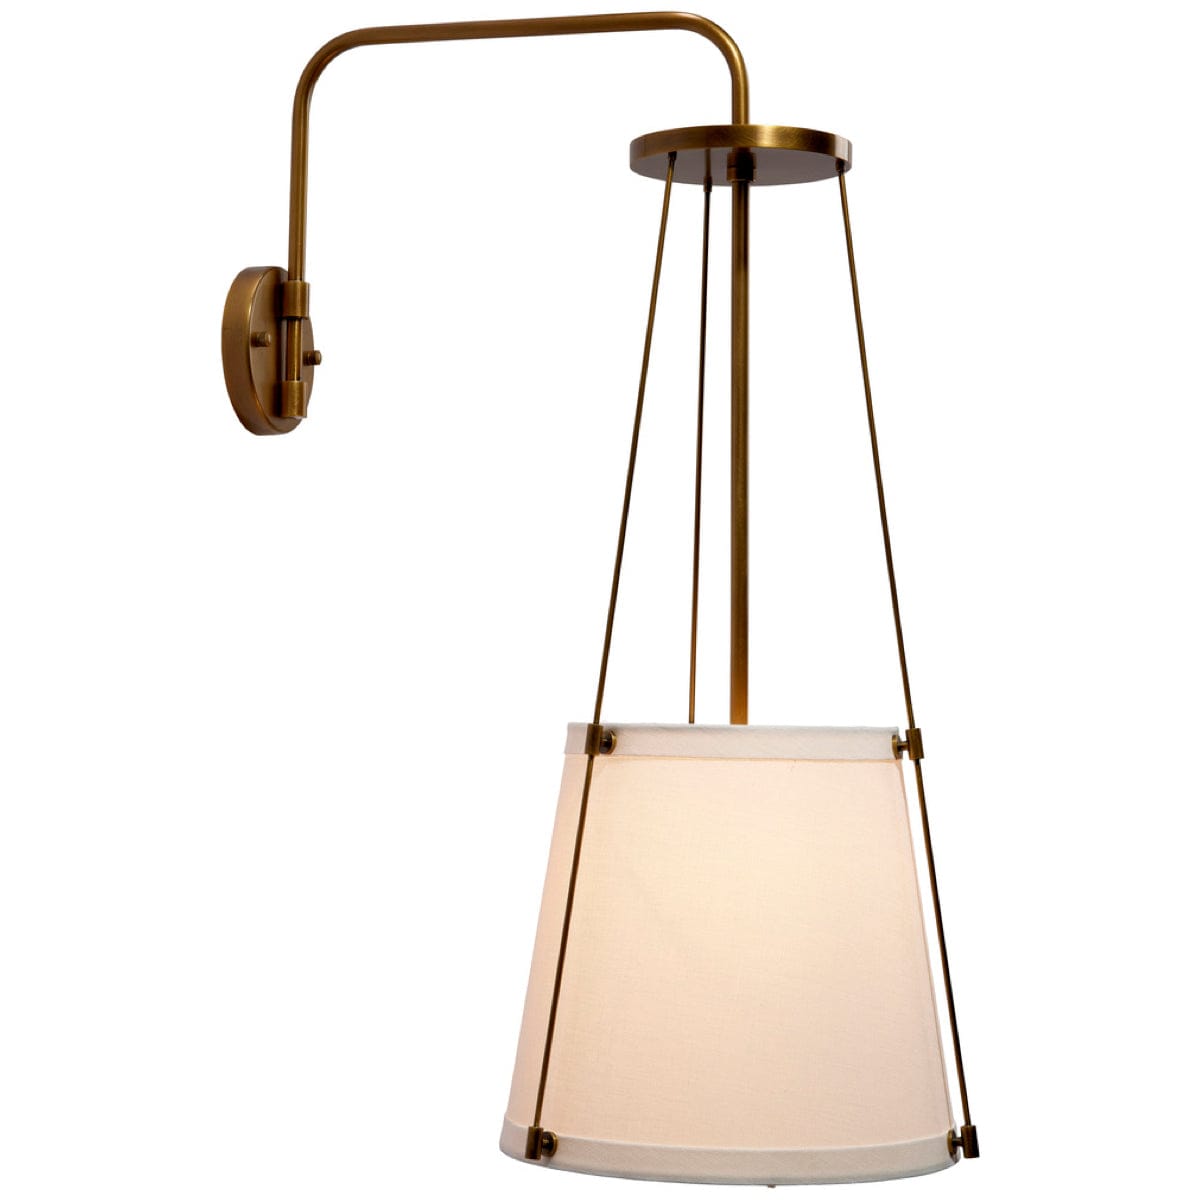 Jamie Young Co. California Wall Sconce Lighting